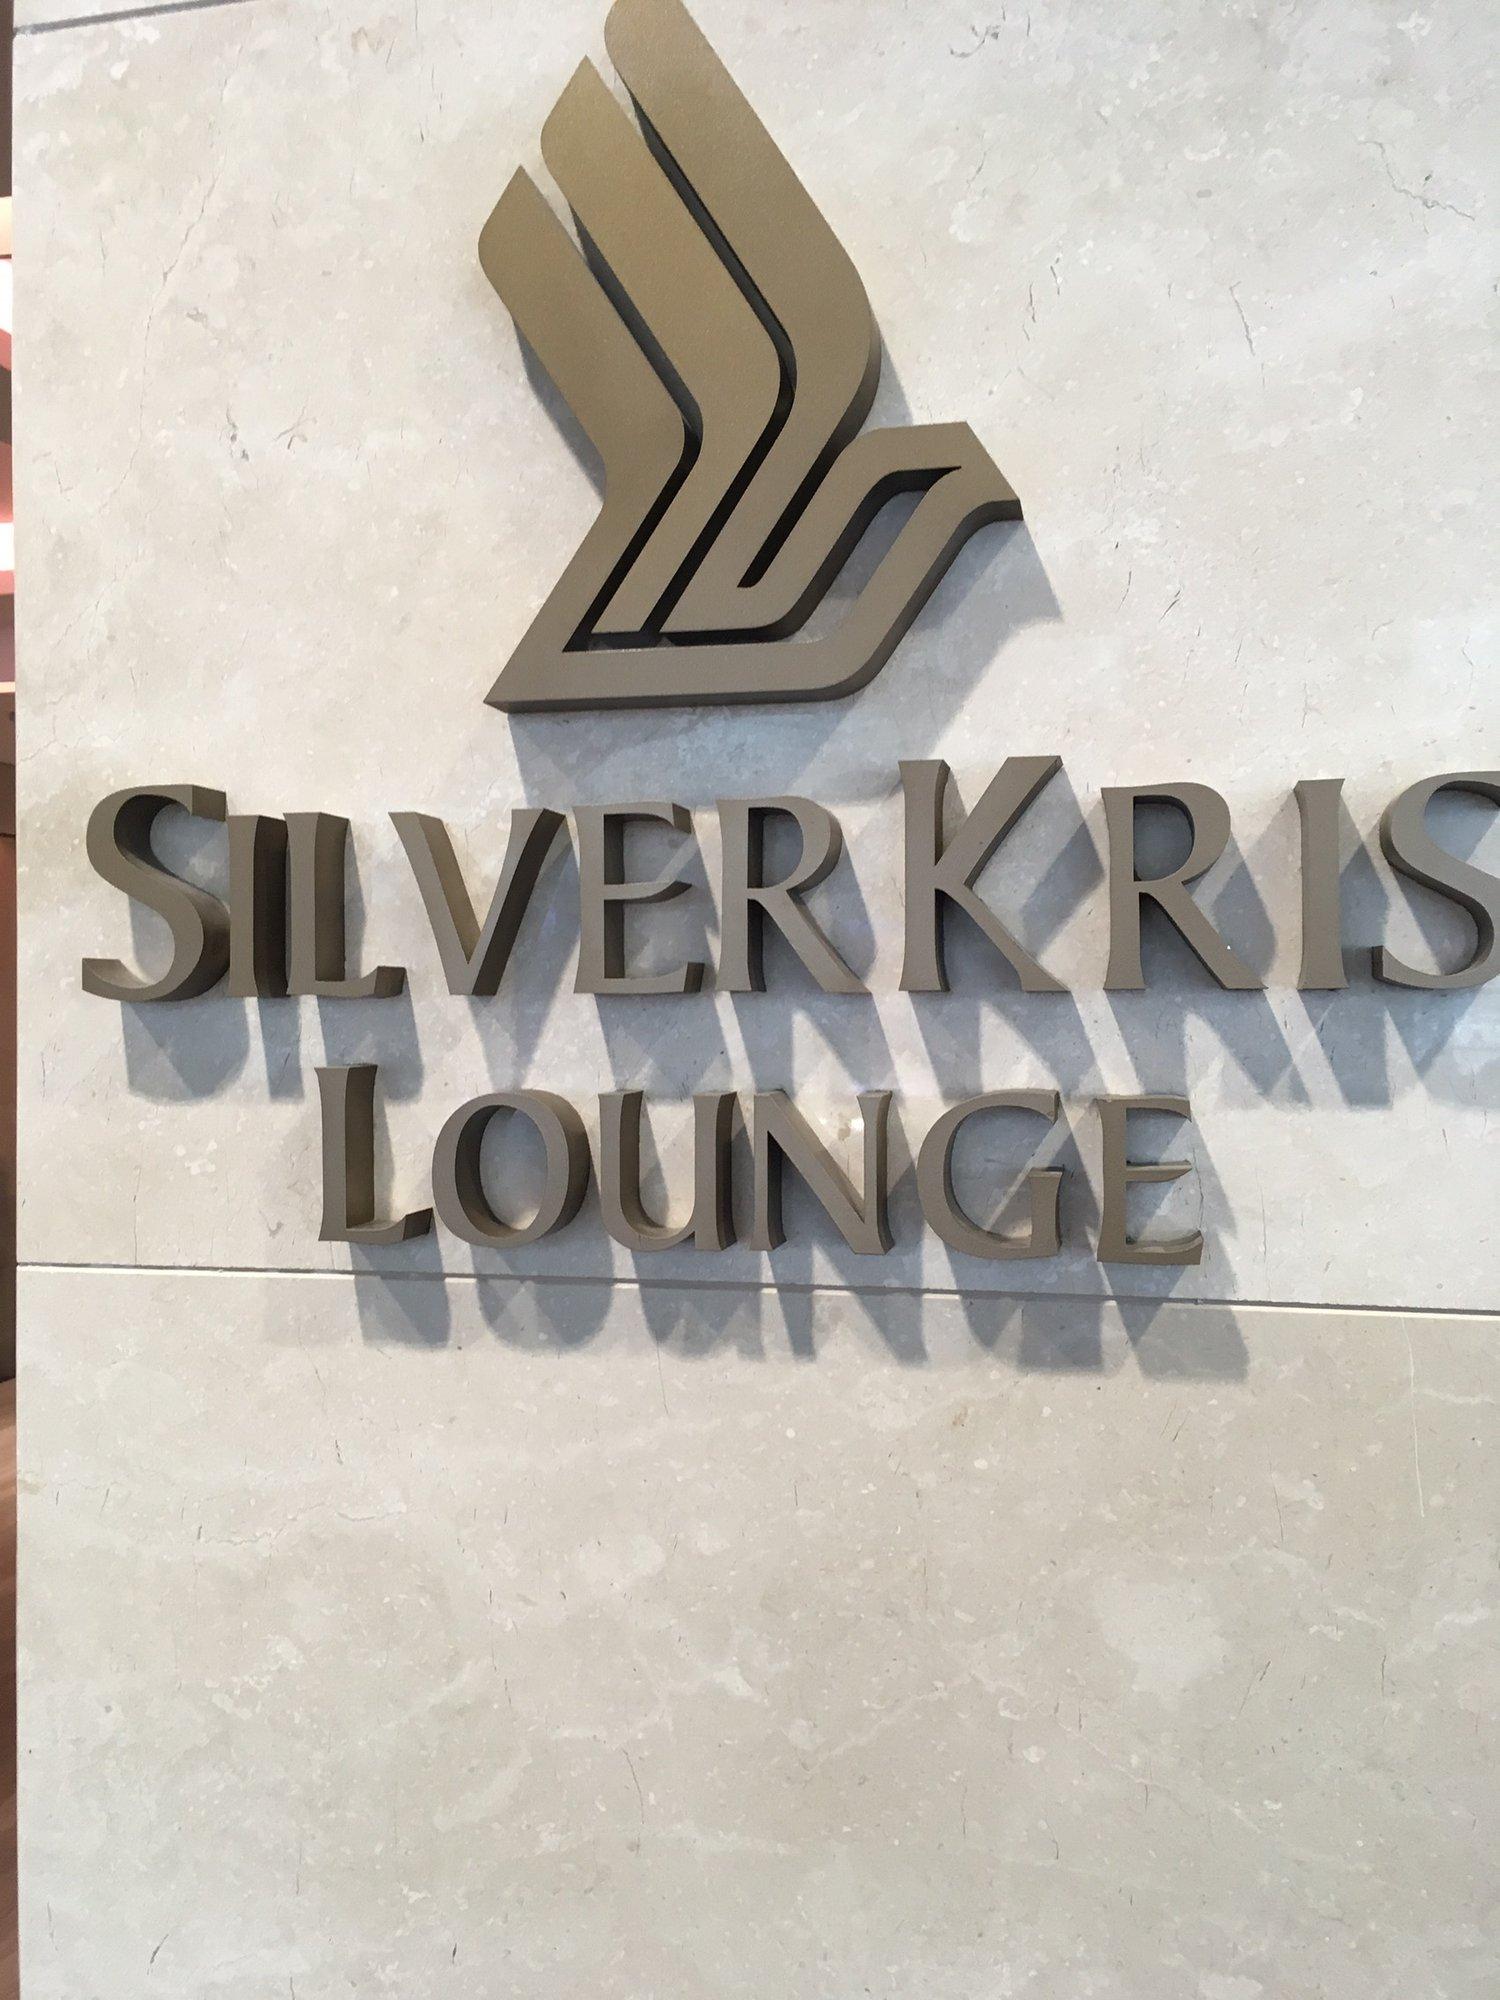 Singapore Airlines SilverKris First Class Lounge image 16 of 17